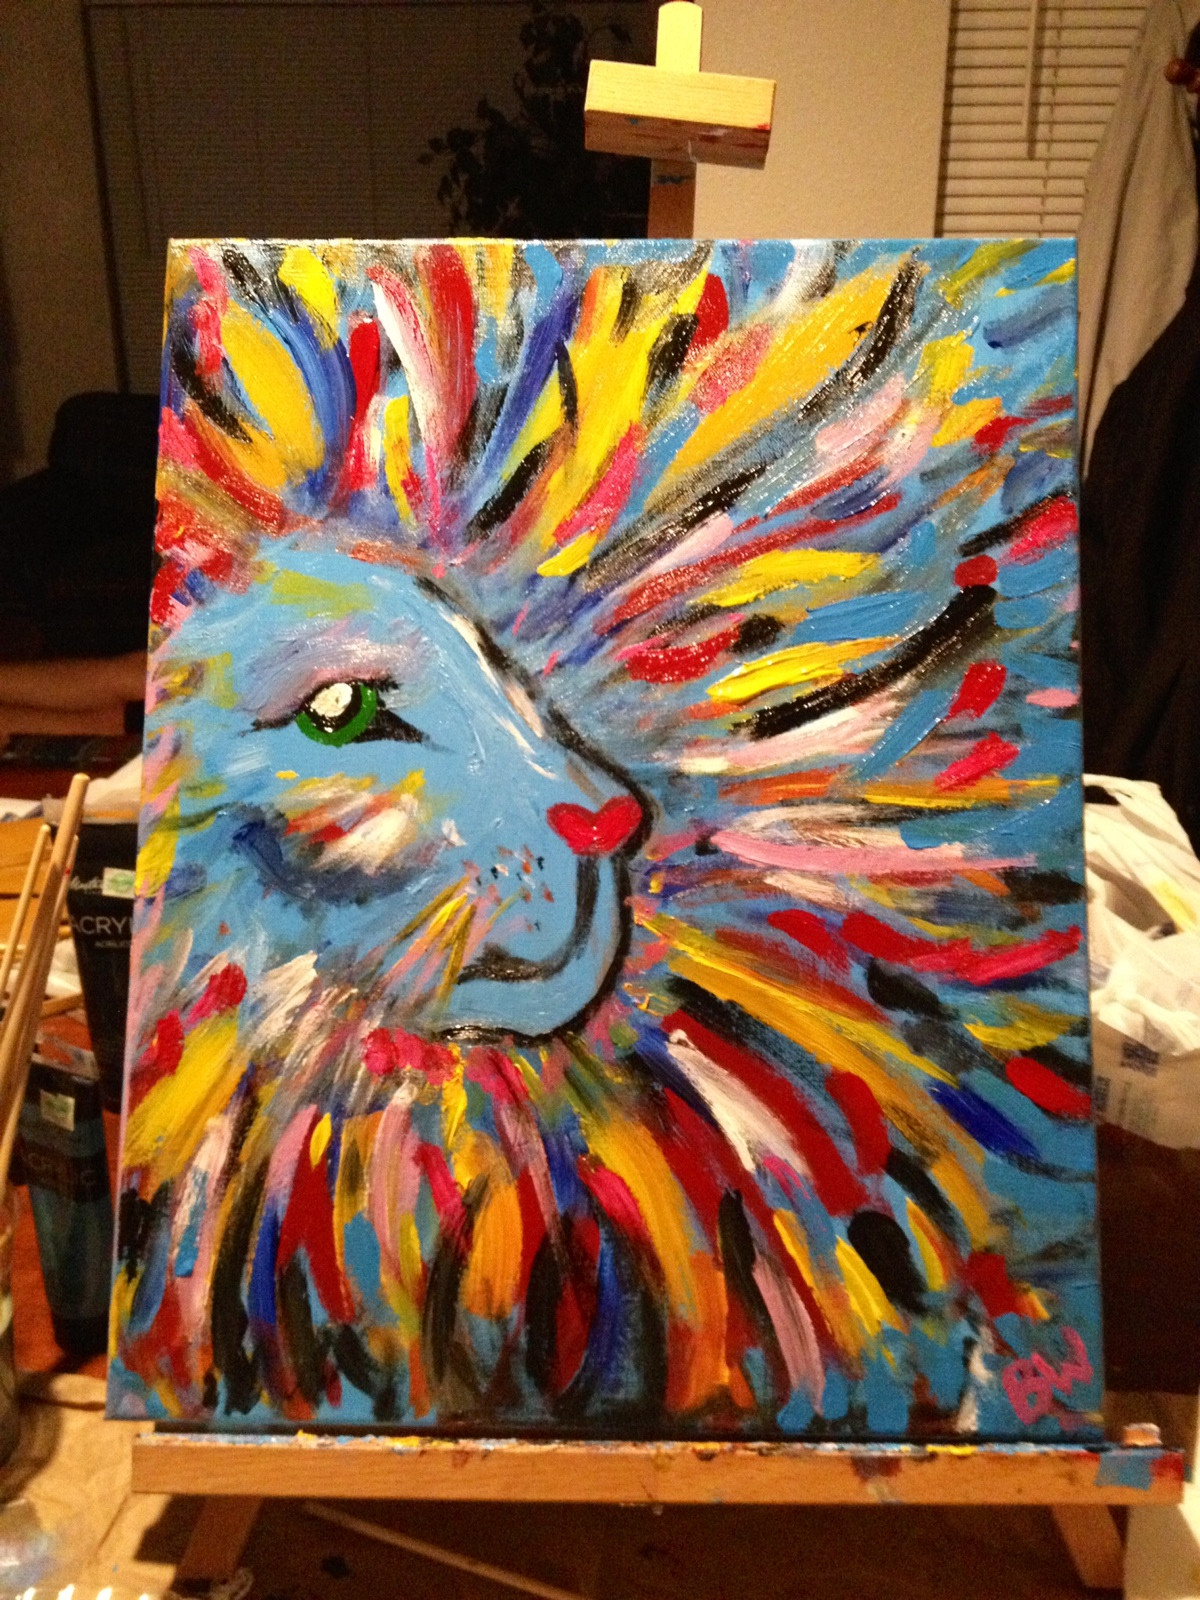 Canvas Painting Ideas For Kids
 My Big Girly Lion DIY canvas painting